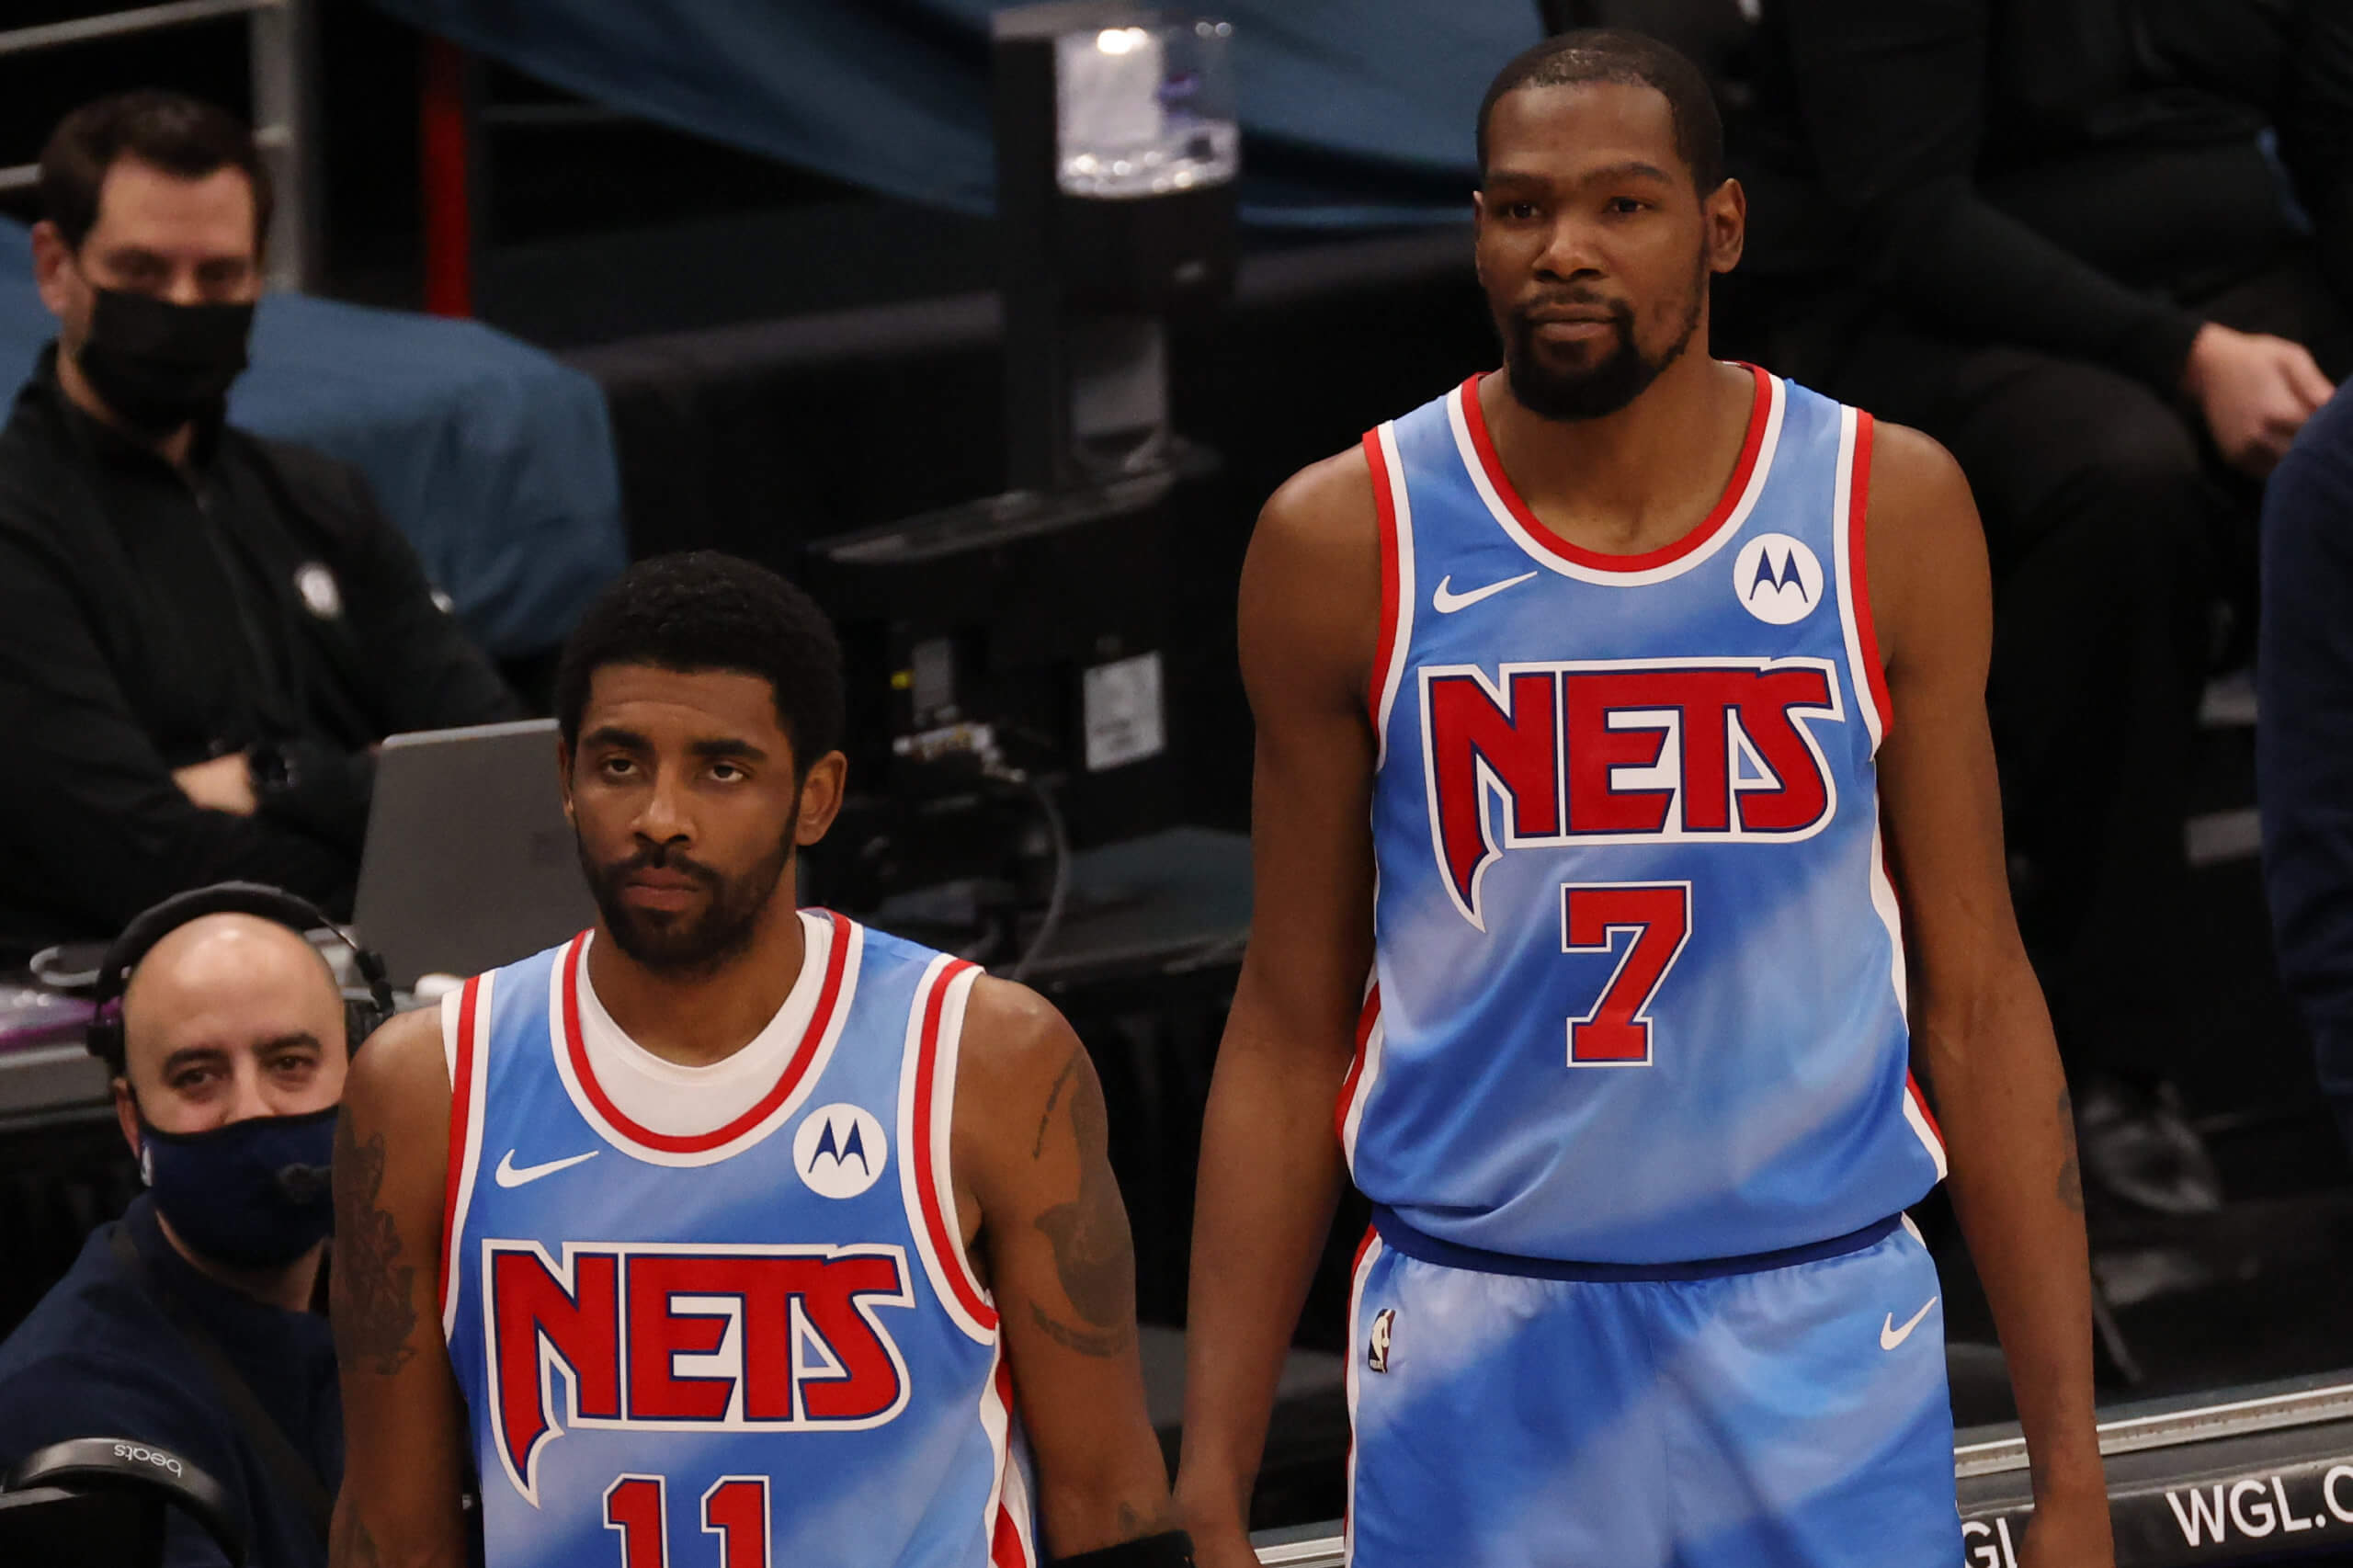 Kyrie Irving, Kevin Durant nearing returns to Nets lineup